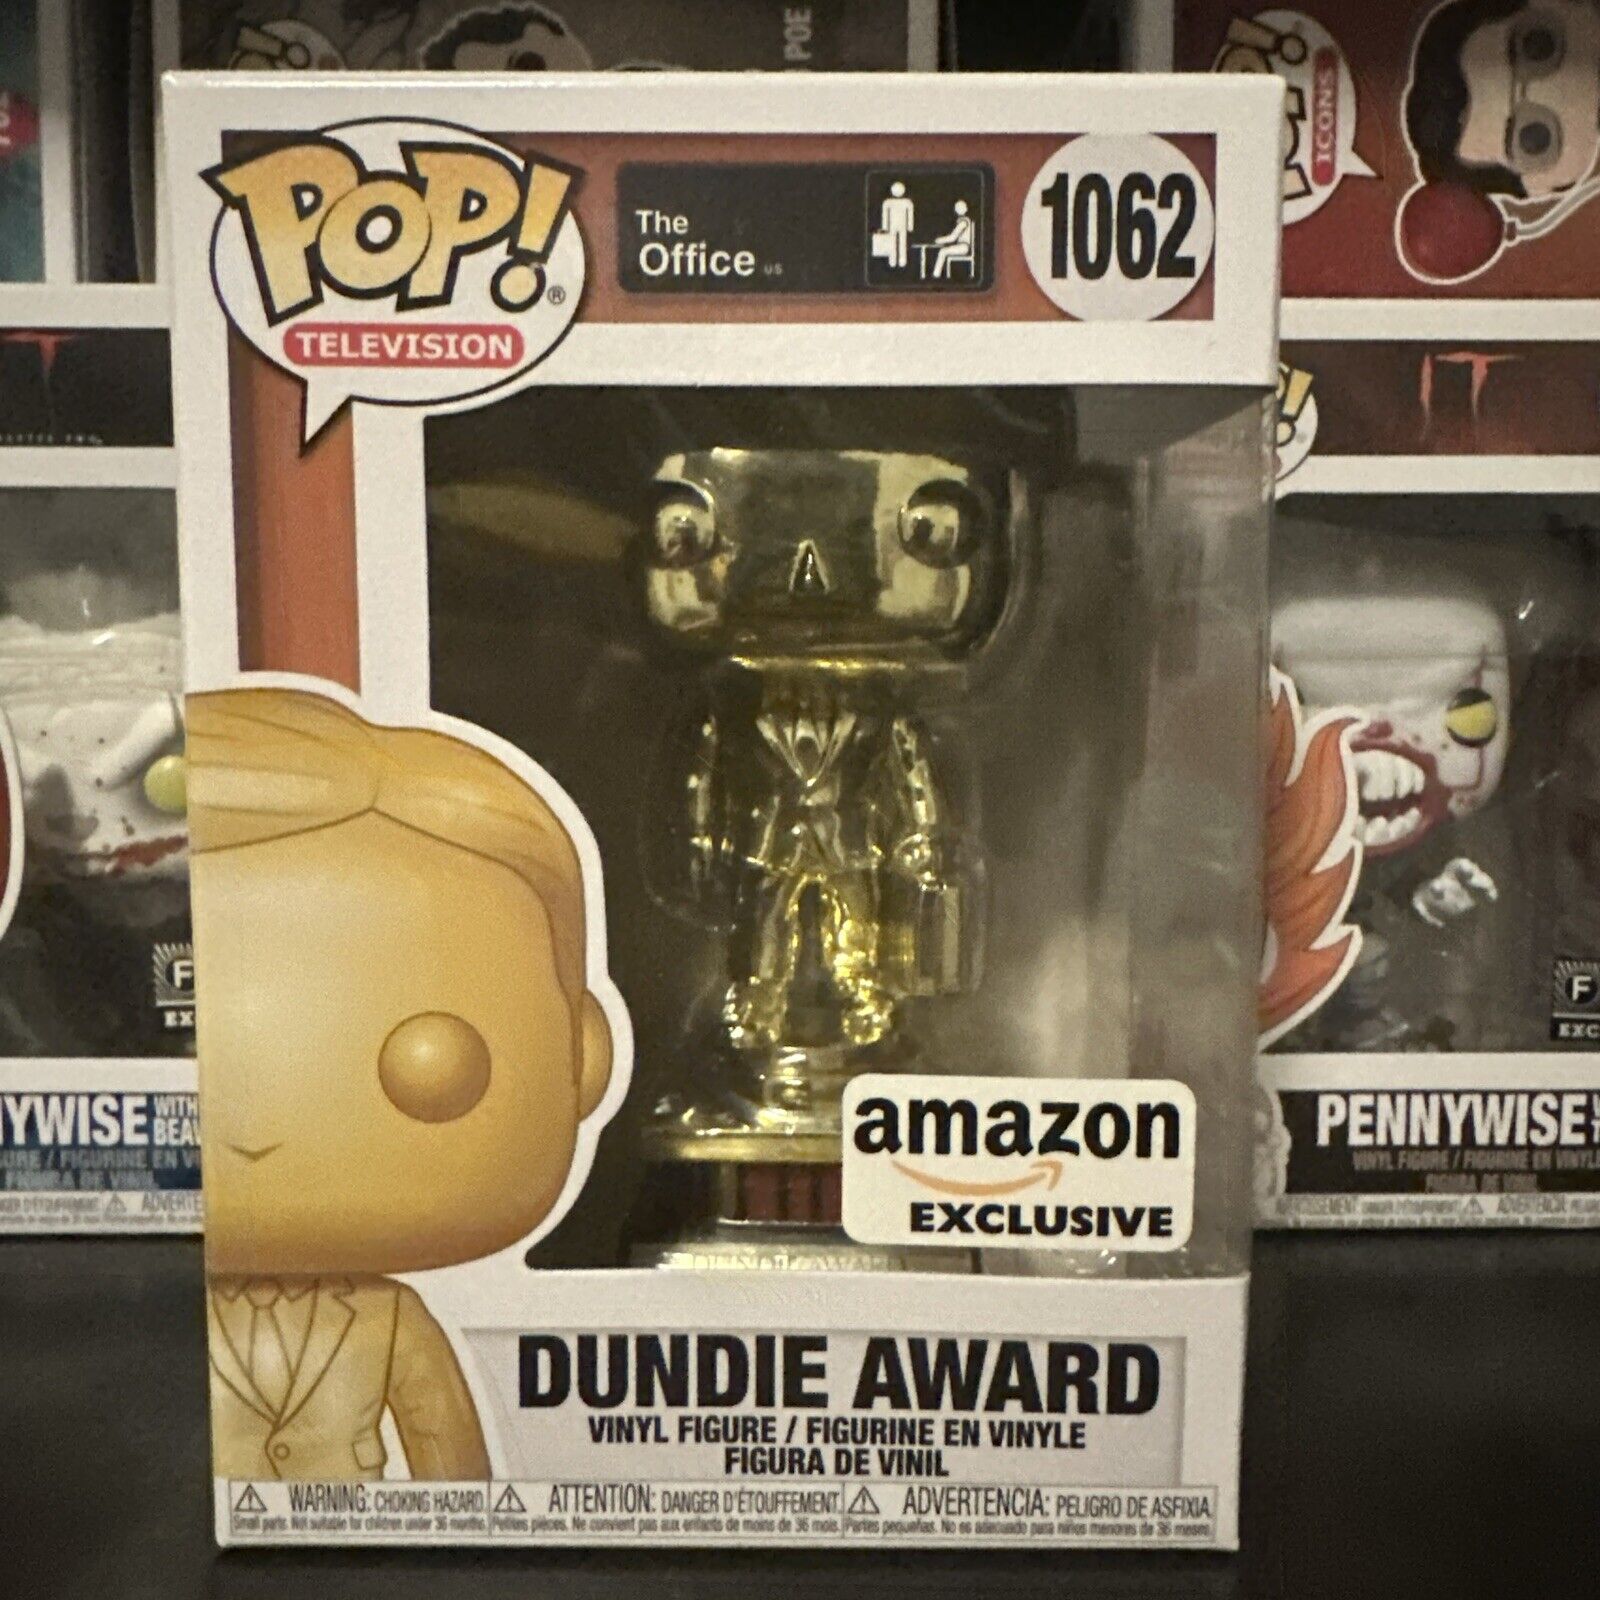 Funko Pop Amazon Exclusive The Office Dundie Award #1062 - New Never Opened